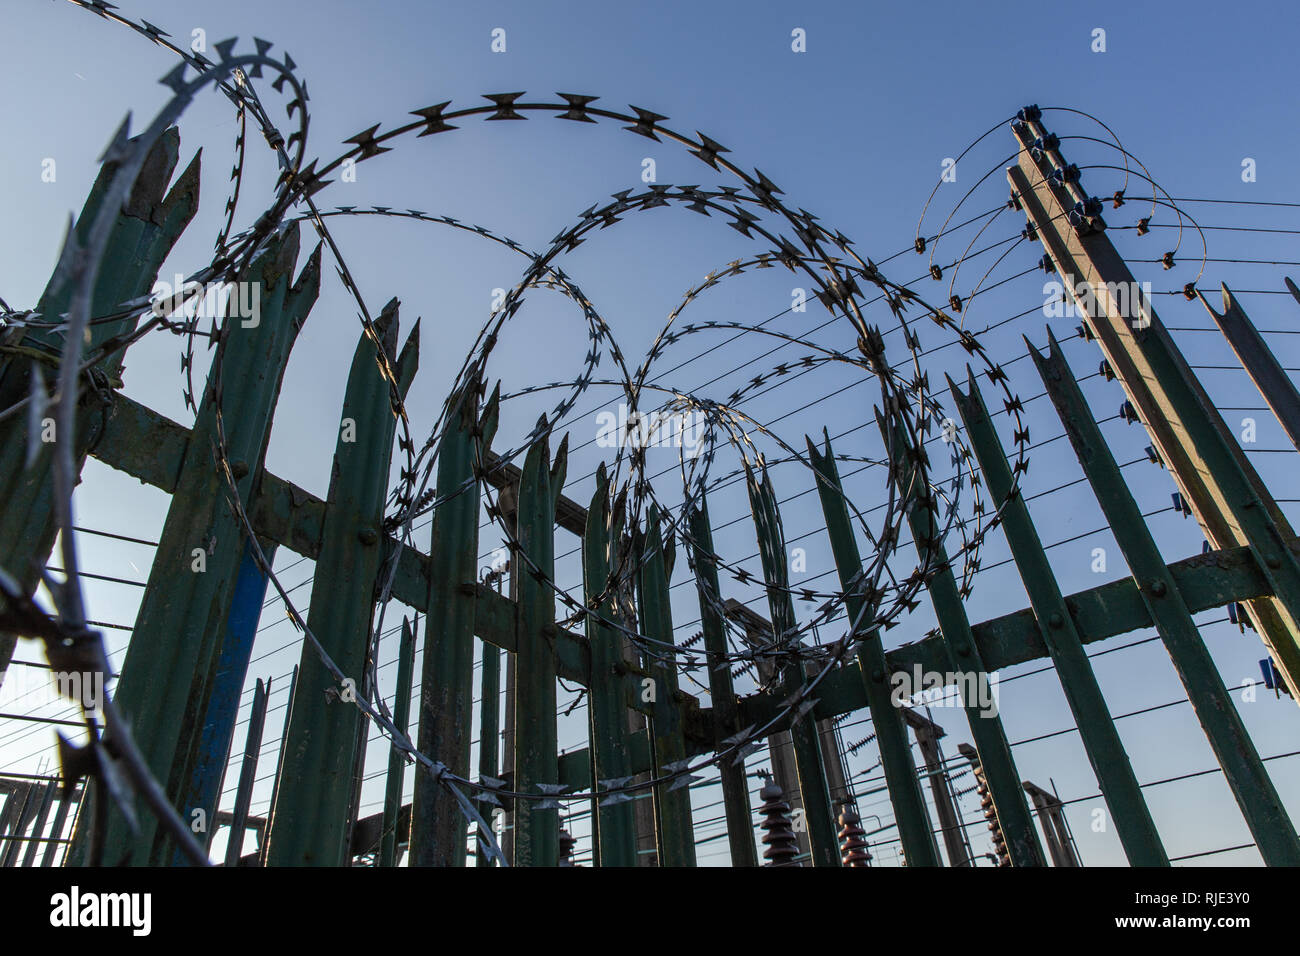 Concertina razor wire used on top of a spiked metal fence to provide security and deter unauthorised access to a  power distribution sub station. Stock Photo